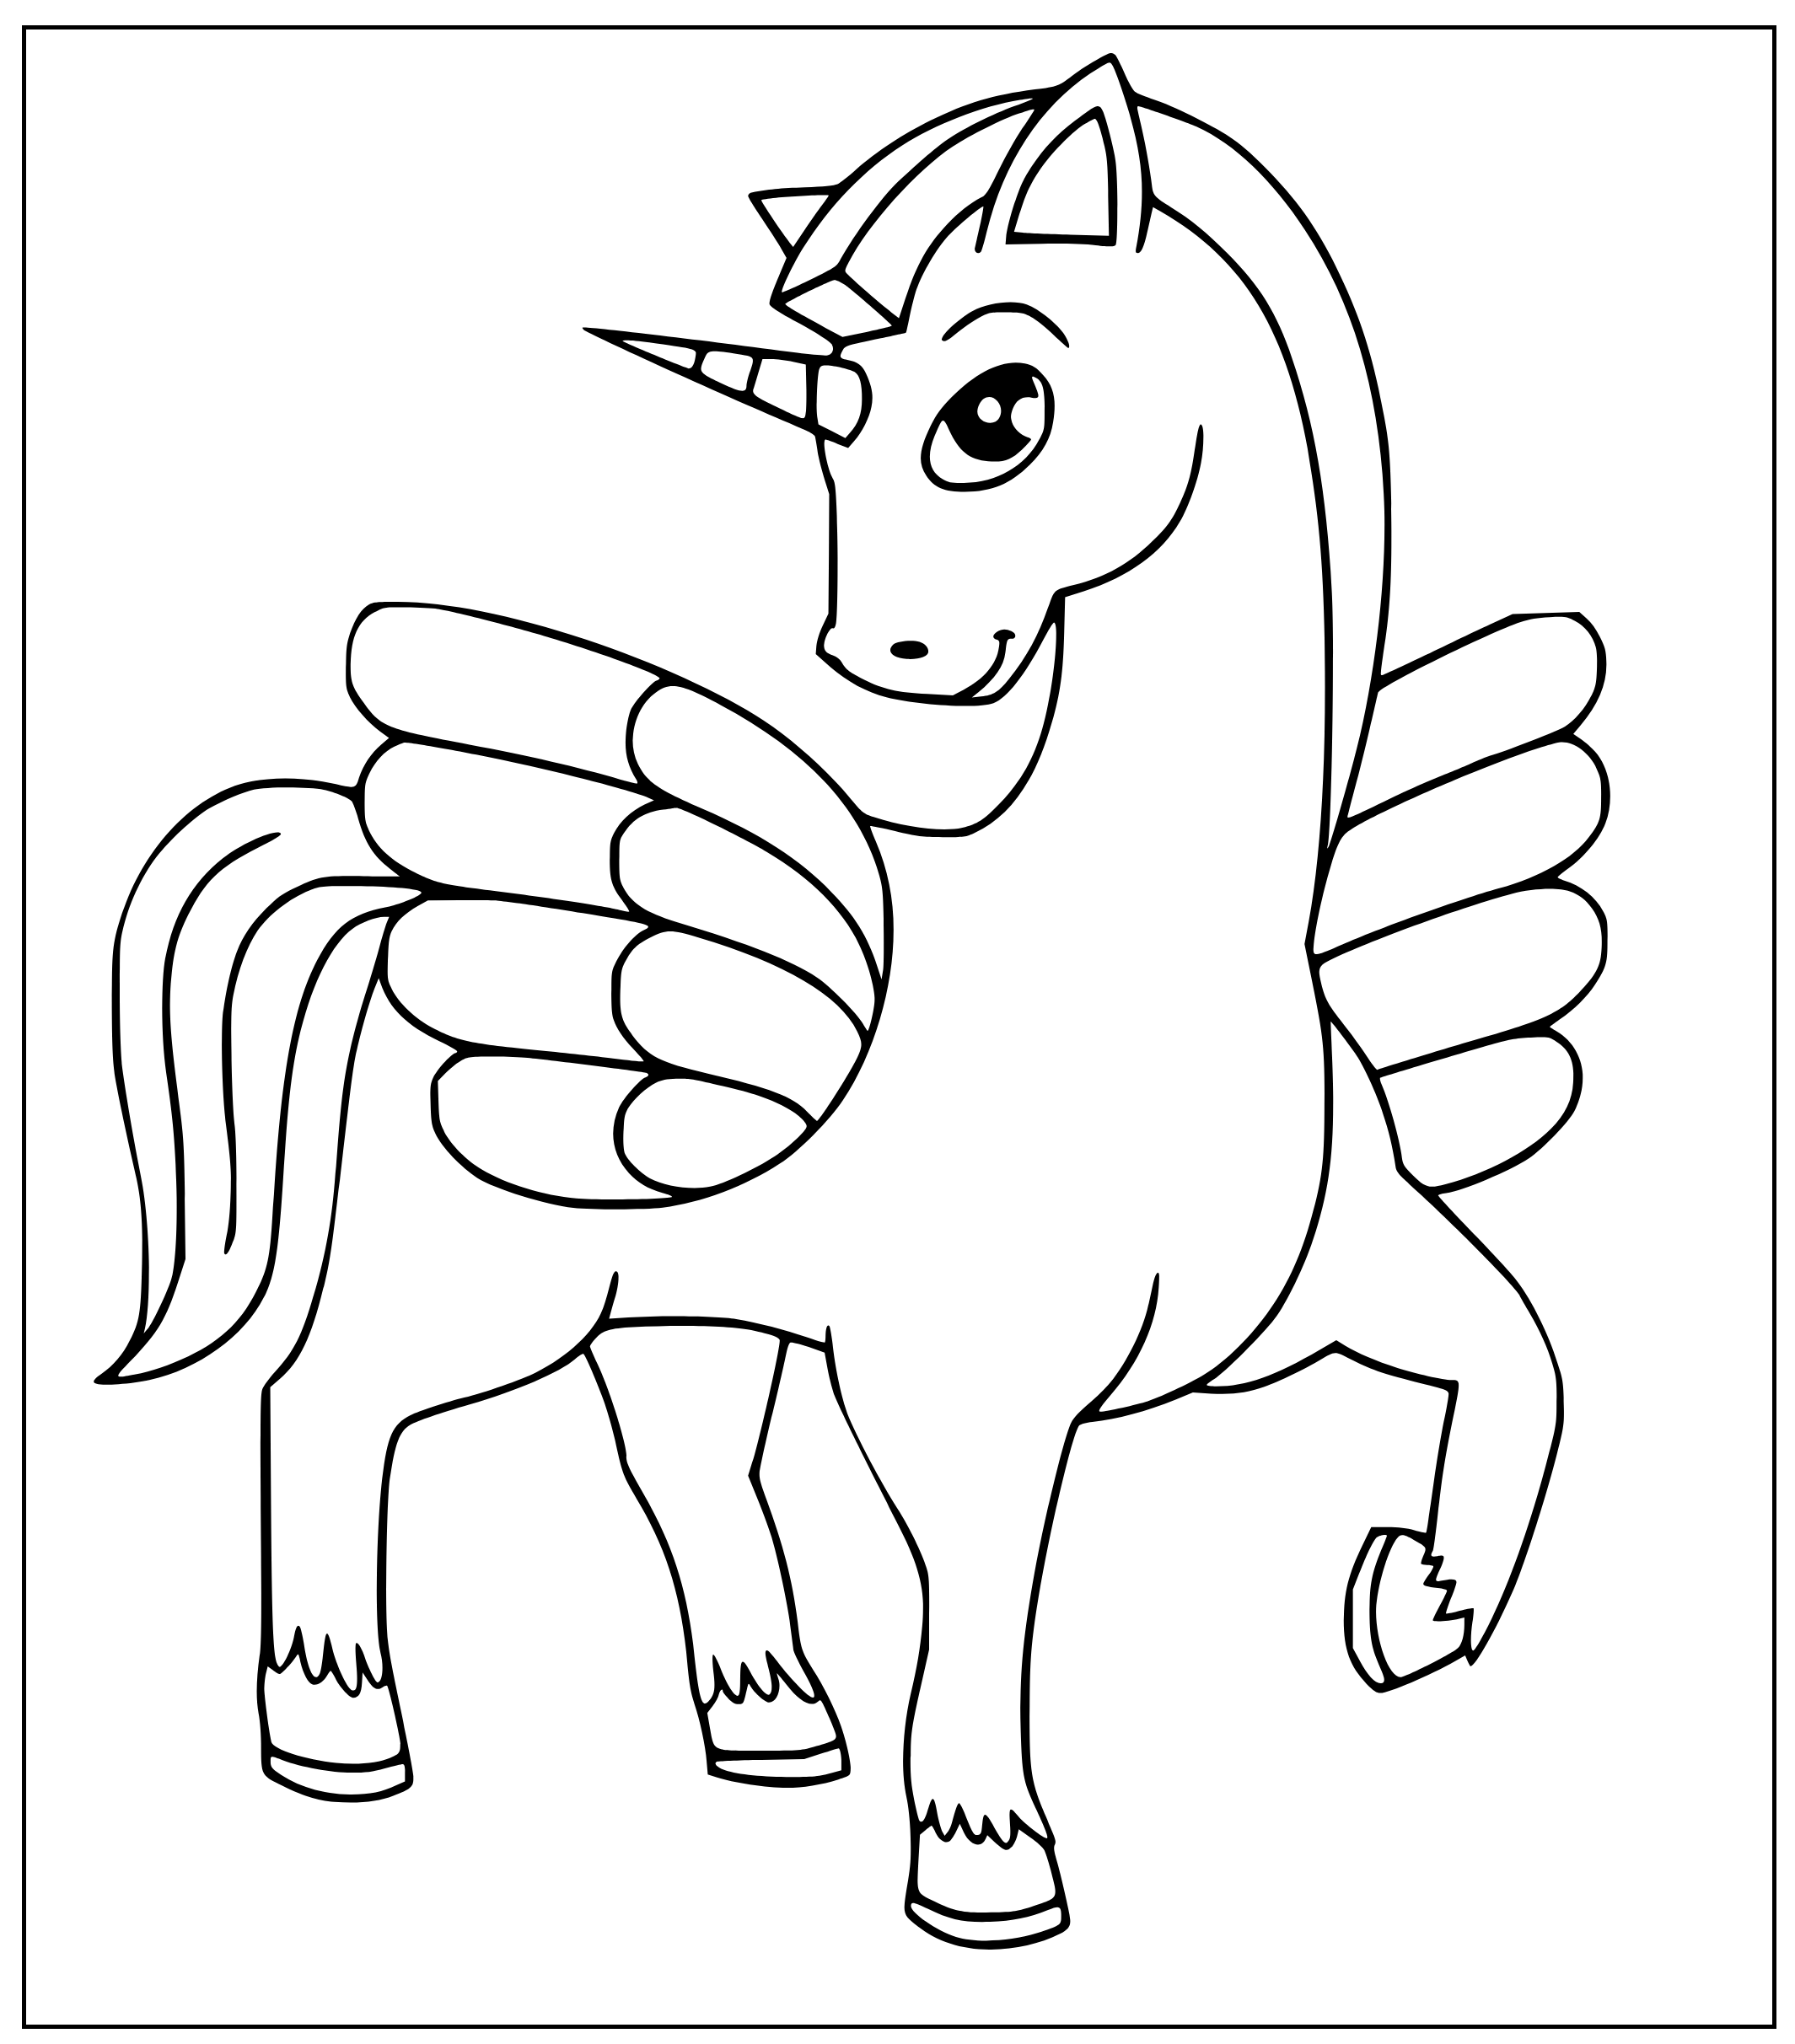 Printable a  alicorn Coloring Page for kids.